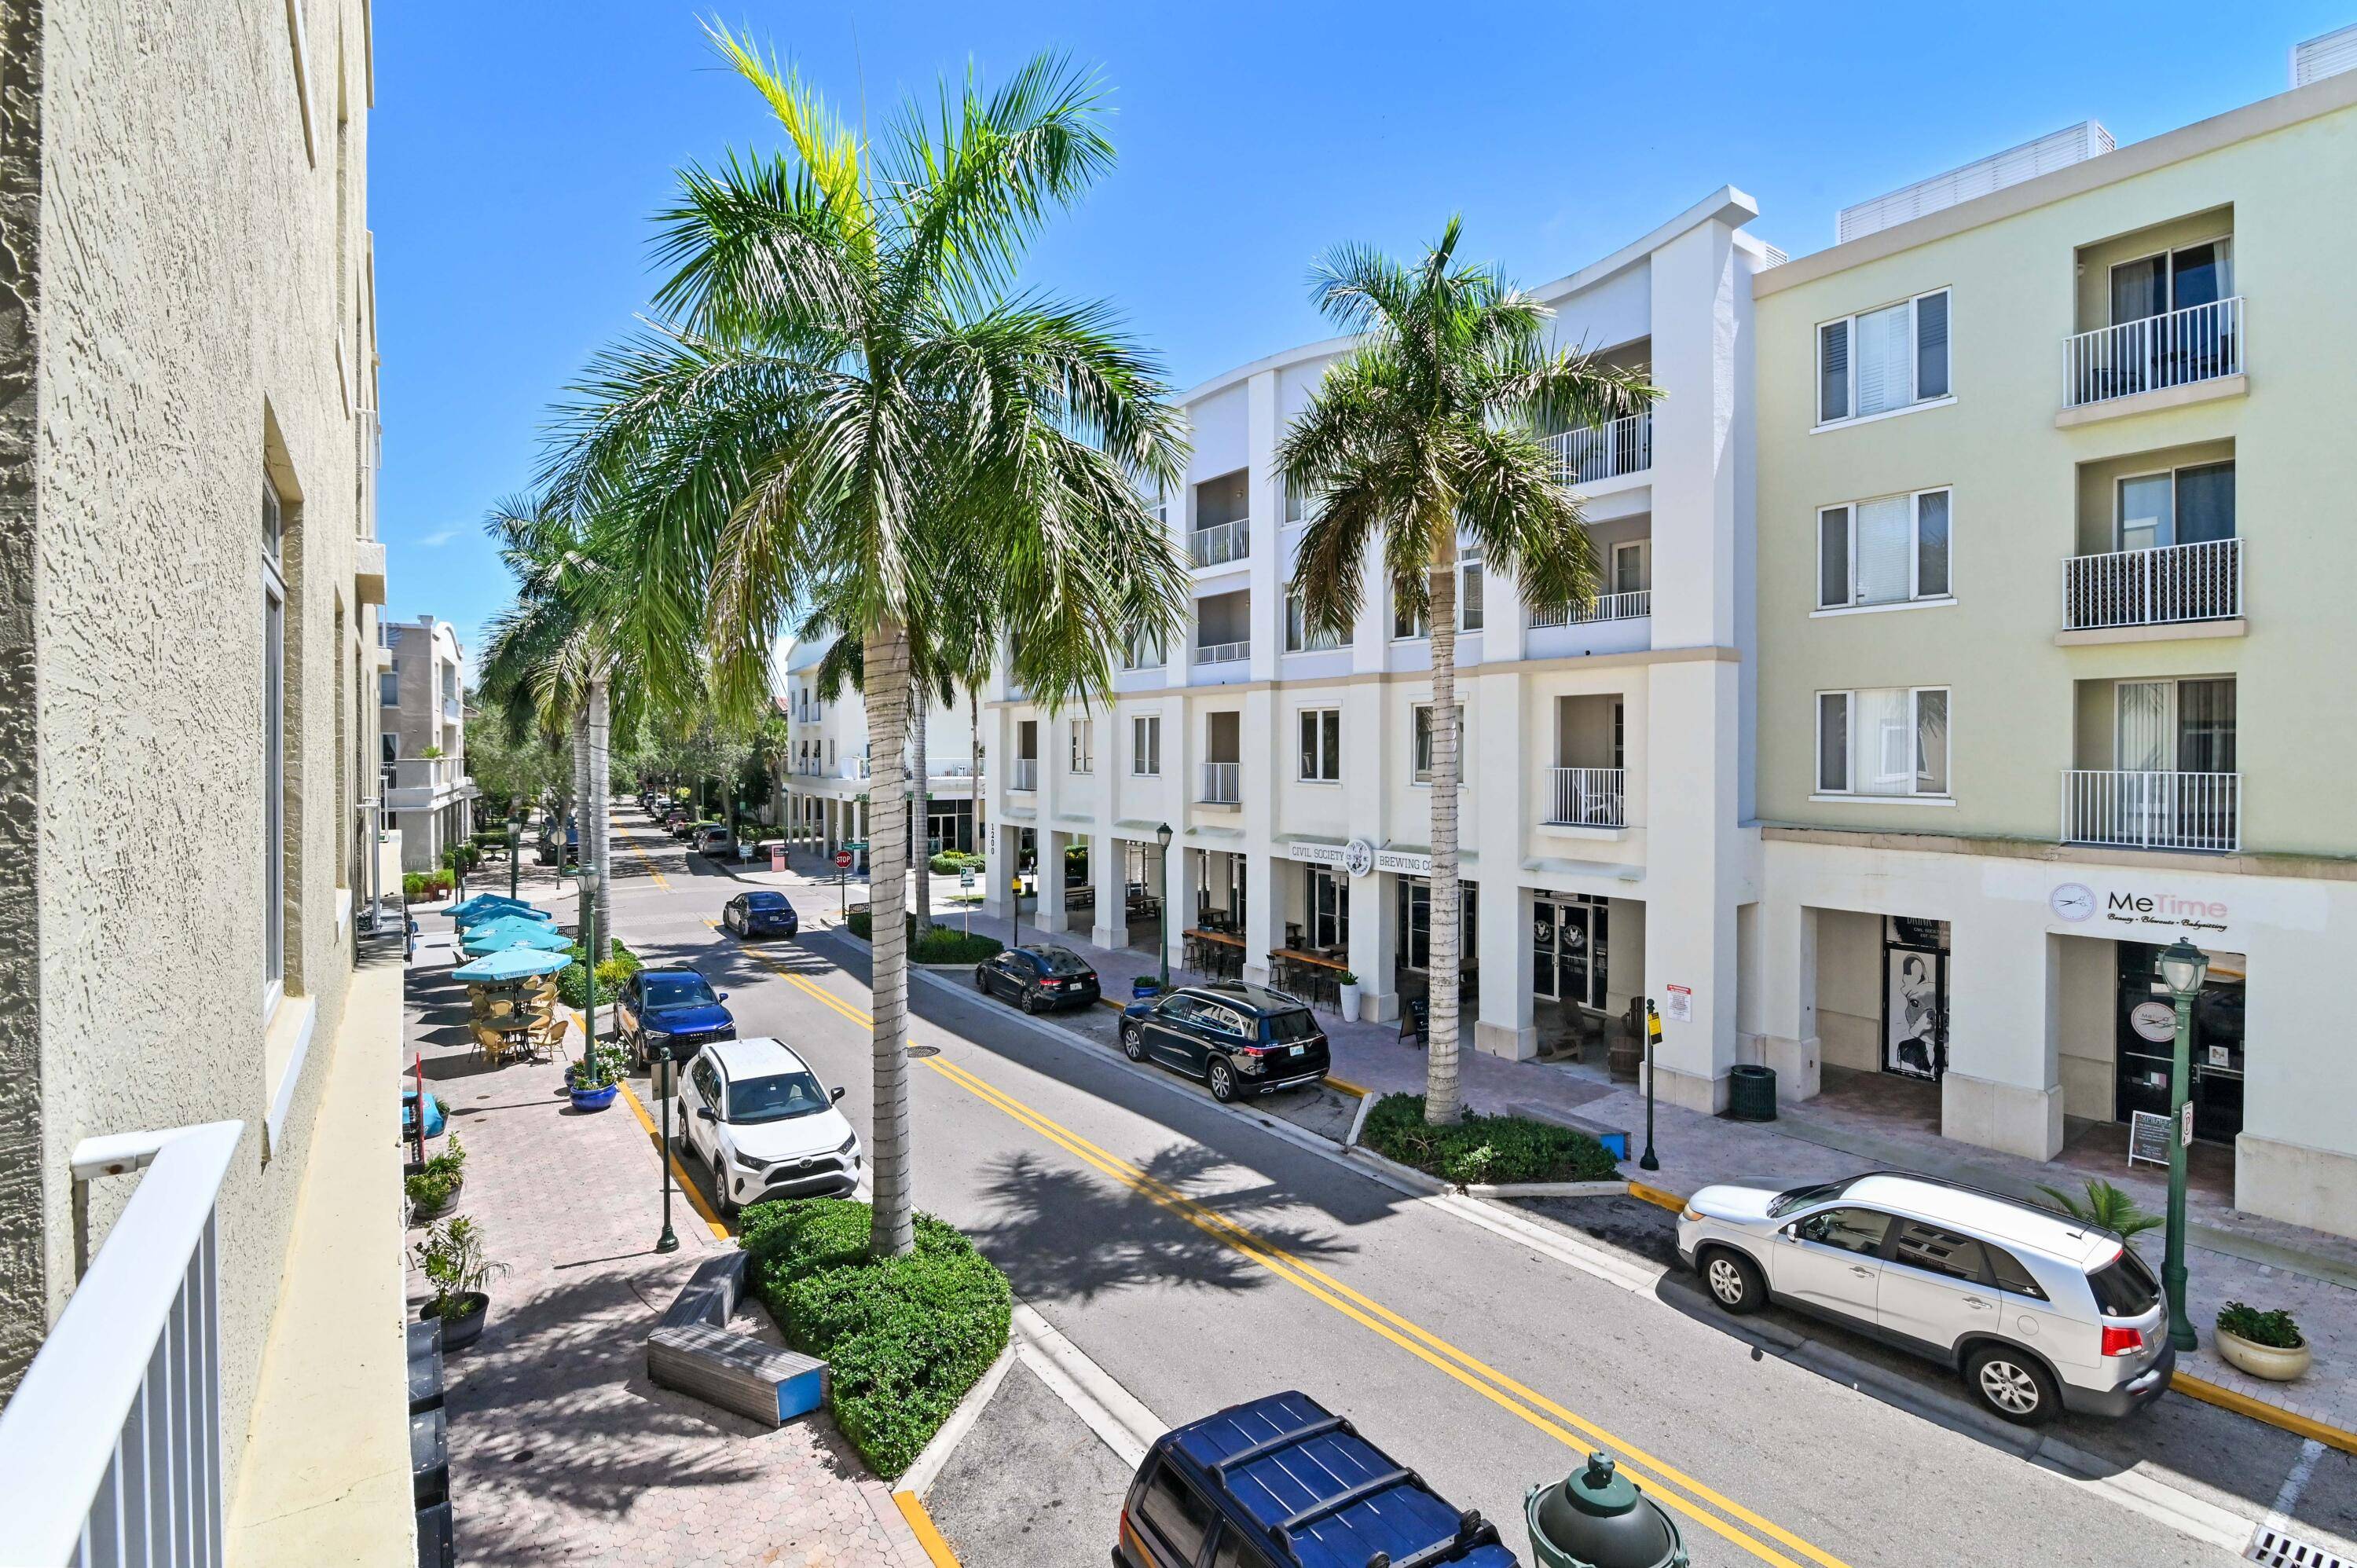 Welcome to your urban oasis in the heart of the highly desirable Abacoa community !